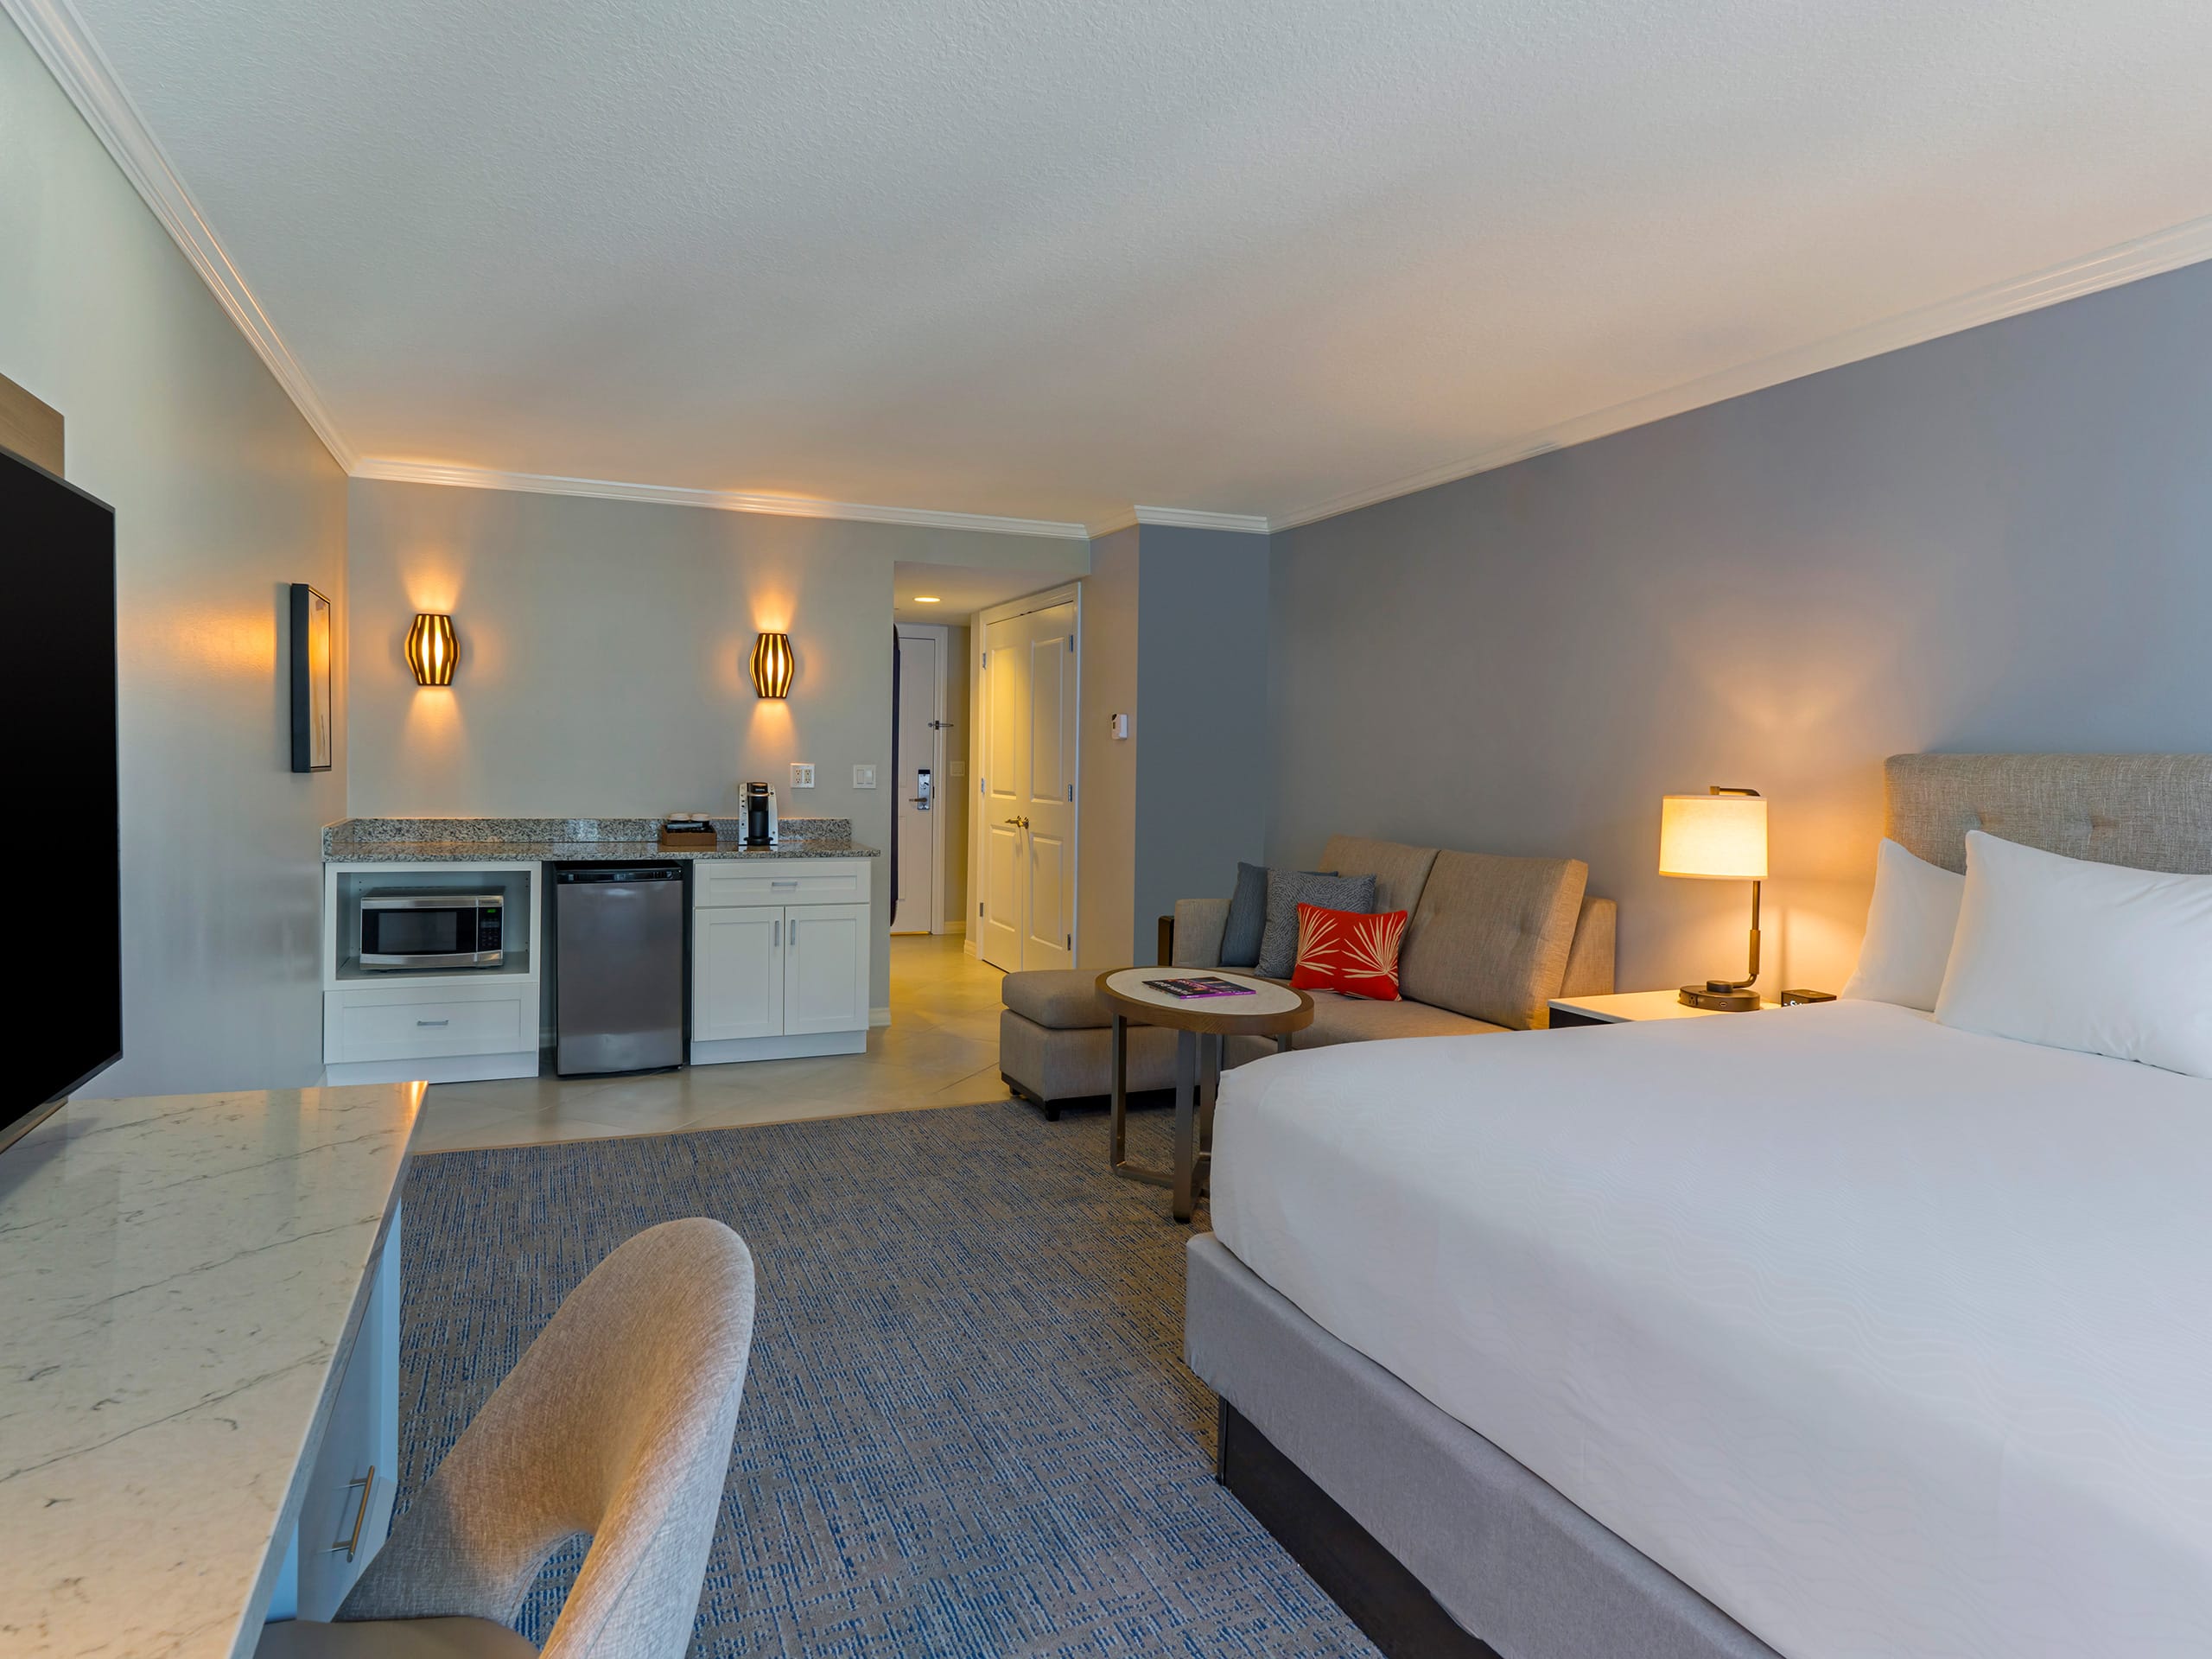 King-sized bed, TV and mini-kitchen in hotel room